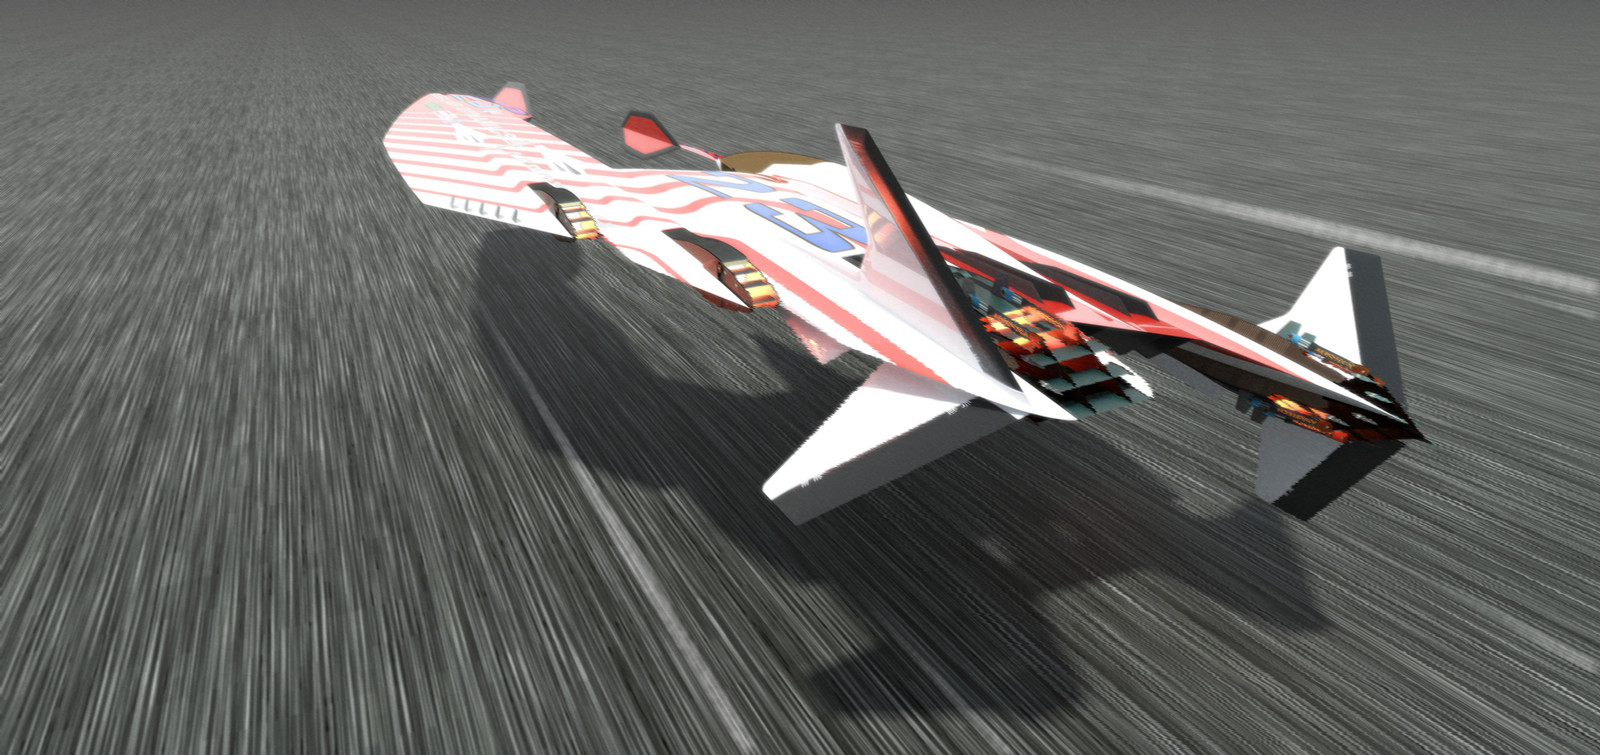 Another shot with effects, same heat haze, contrail , motio blur and rendered glow inside the engines